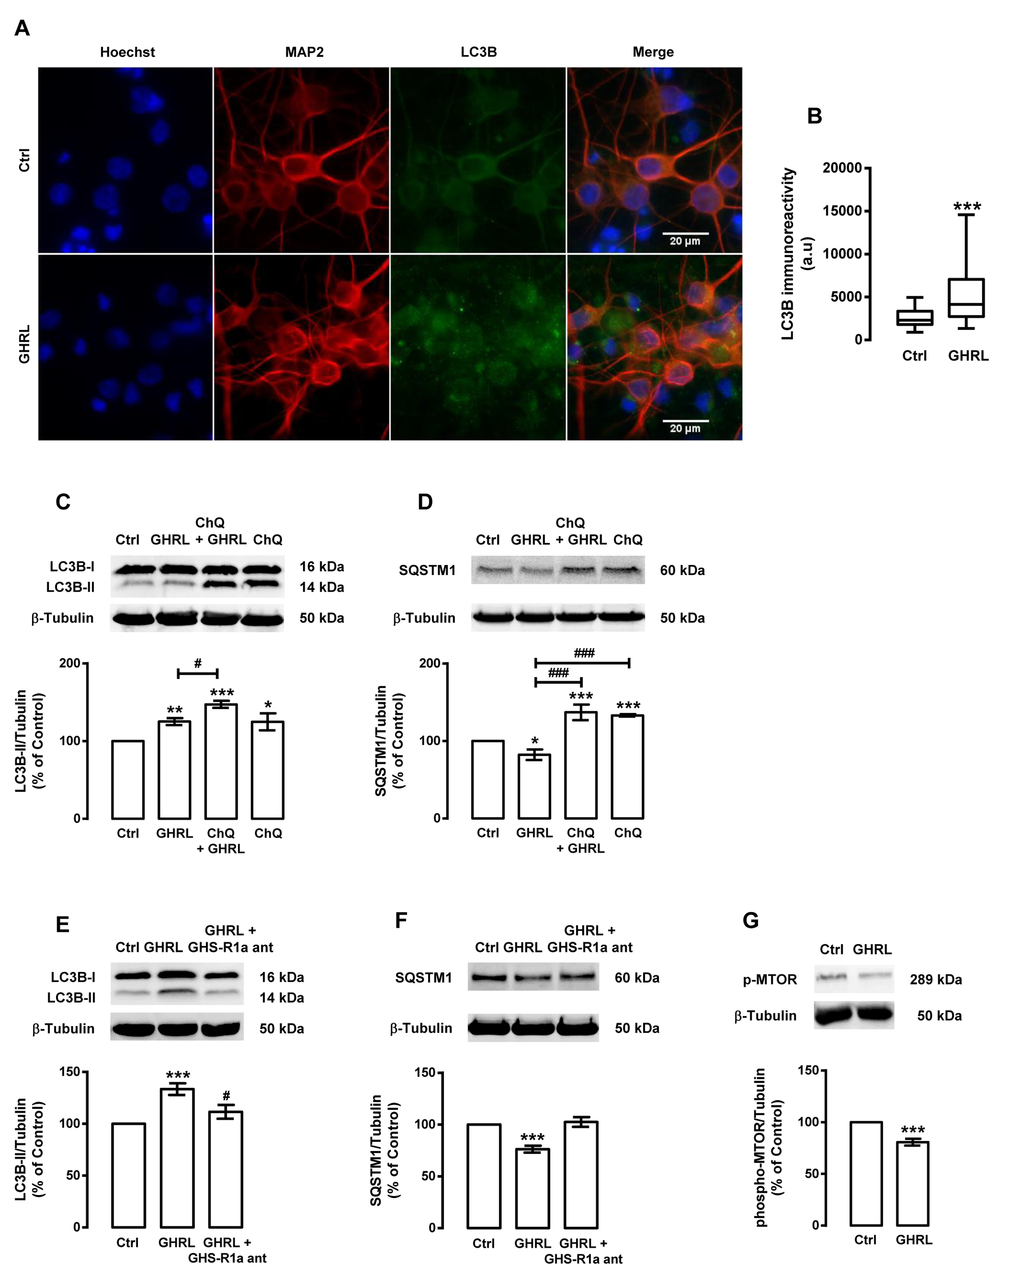 Ghrelin induces autophagy in rat cortical neurons. Primary rat cortical neurons were exposed to ghrelin (GHRL, 10 nM) for 6 h. Untreated cells were used as control (Ctrl). (A) LC3B cellular distribution was assessed by immunocytochemistry assay, as described in Materials and Methods. Cells were immunolabeled for LC3B (green) and MAP2 (red, neurons). Nuclei were stained with Hoechst 33342 (blue). Figures are representative of three independents experiments. Scale bar, 20 μM. (B) Quantification of the number of LC3B puncta immunoreactivity (green) per cell in each condition (>20 cells per group). ***pC-G) Cells were incubated with chloroquine (ChQ, 100 μM), a lysosomal degradation inhibitor (C and D) or GHS-R1a receptor antagonist [D-Lys3]-GHRP-6 (GHS-R1a ant, 100 μM) (E and F), 30 min before ghrelin (GHRL, 10 nM) treatment for 6 h. Whole cell extracts were assayed for LC3B-II (C and E), SQSTM1 (D and F), phospho-MTOR (p-MTOR) (G) and β-tubulin (loading control) immunoreactivity through Western blotting analysis, as described in Materials and Methods. Representative Western blots for each protein are presented above each respective graph. The results represent the mean ± SEM of, at least, five independents experiments, and are expressed as percentage of control. *p#p###p